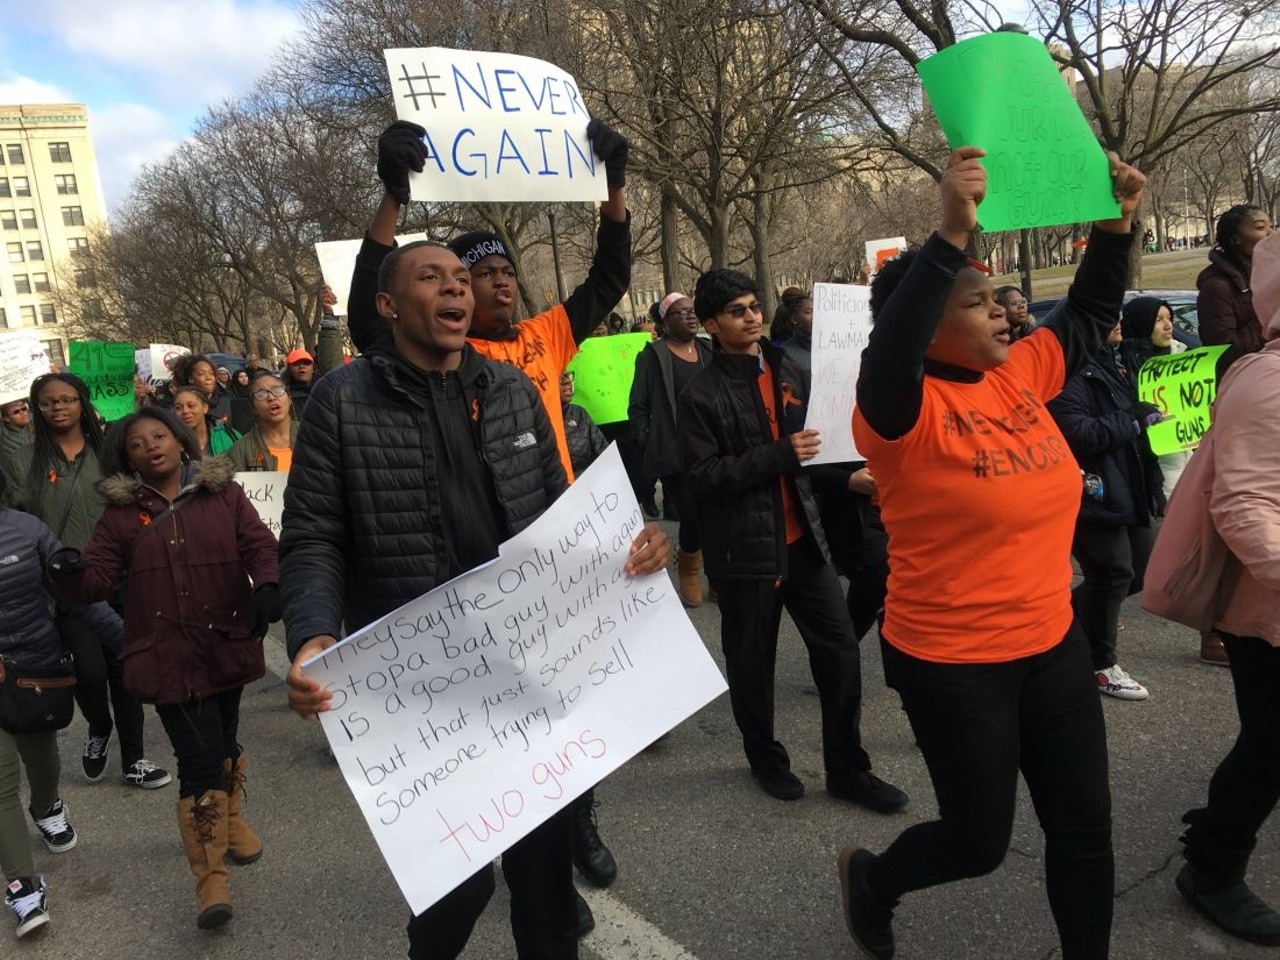 Photos from the National School Walkout Day protest at Cass Technical High School